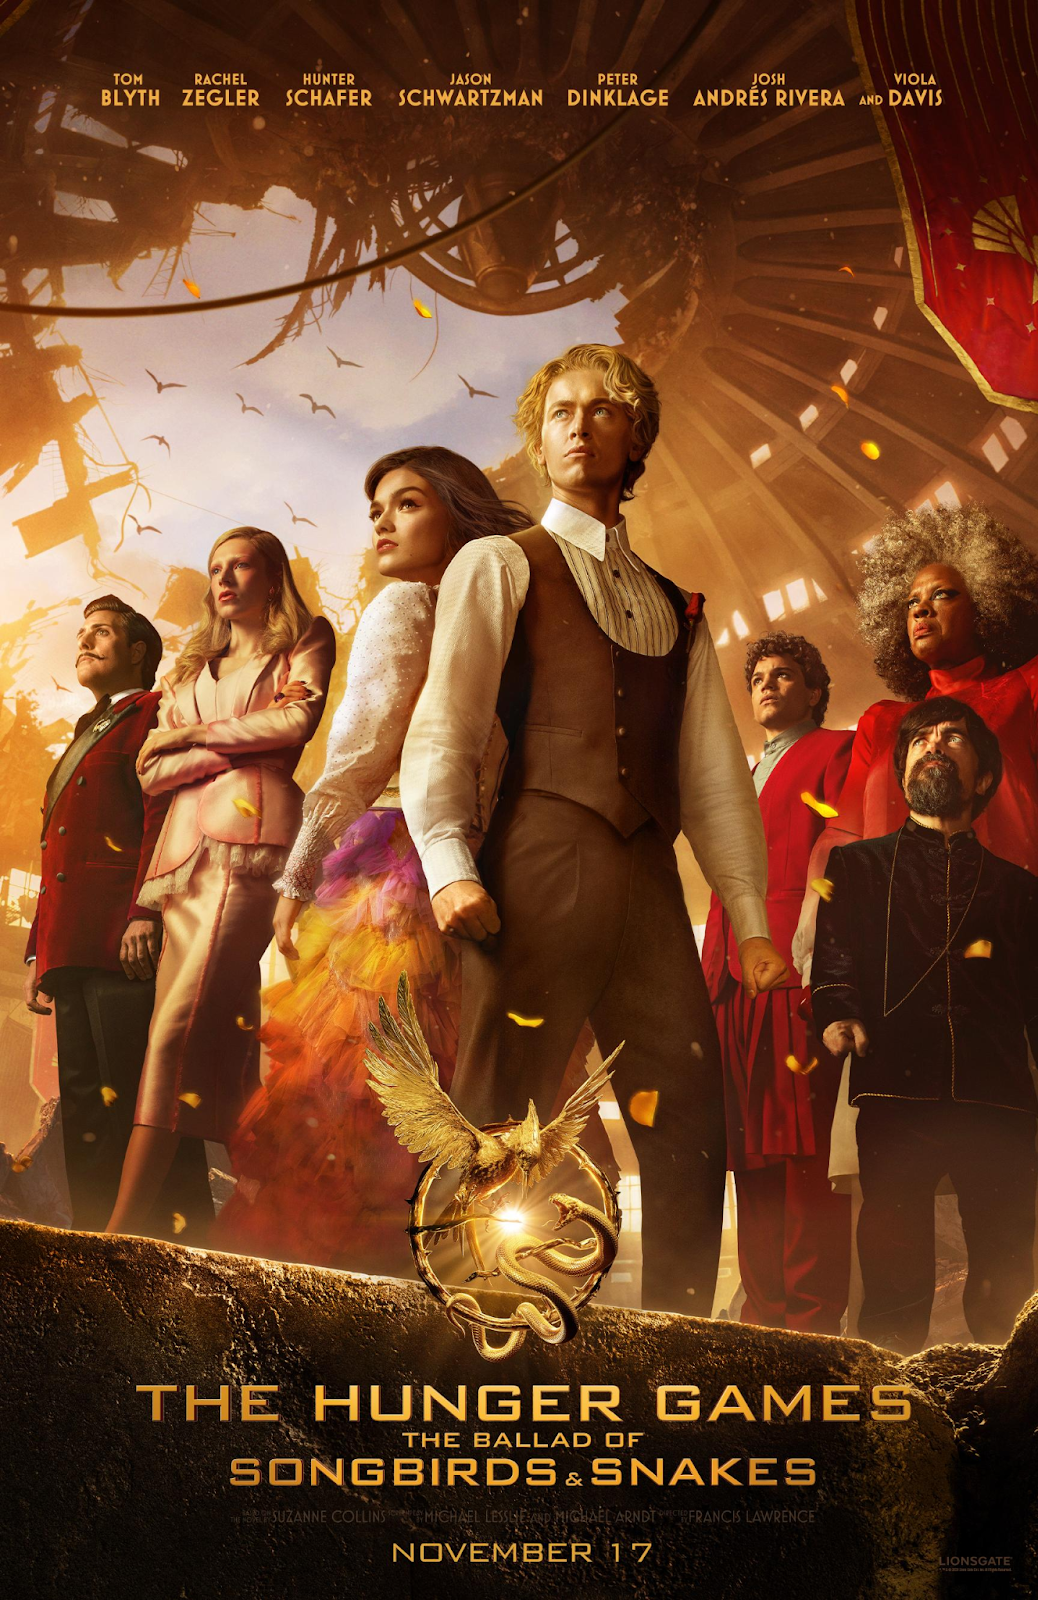 The Hunger Games: Ballad of Songbirds and Snakes Poster